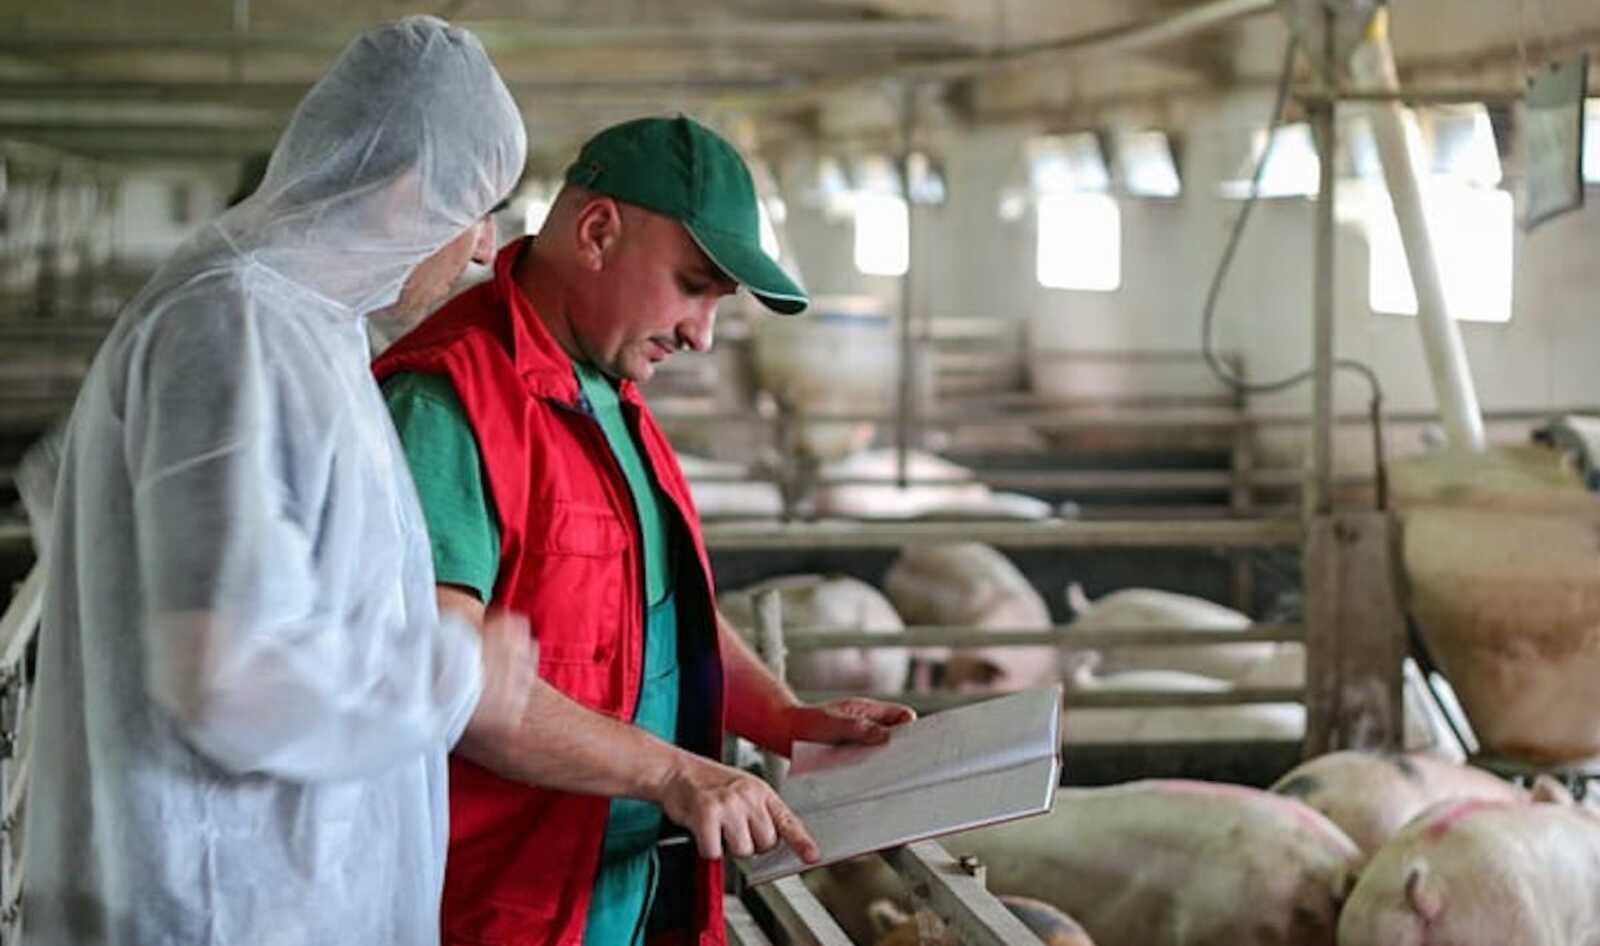 This Organization Aims to Help 700,000 Workers Transition Away from Animal Agriculture&nbsp;